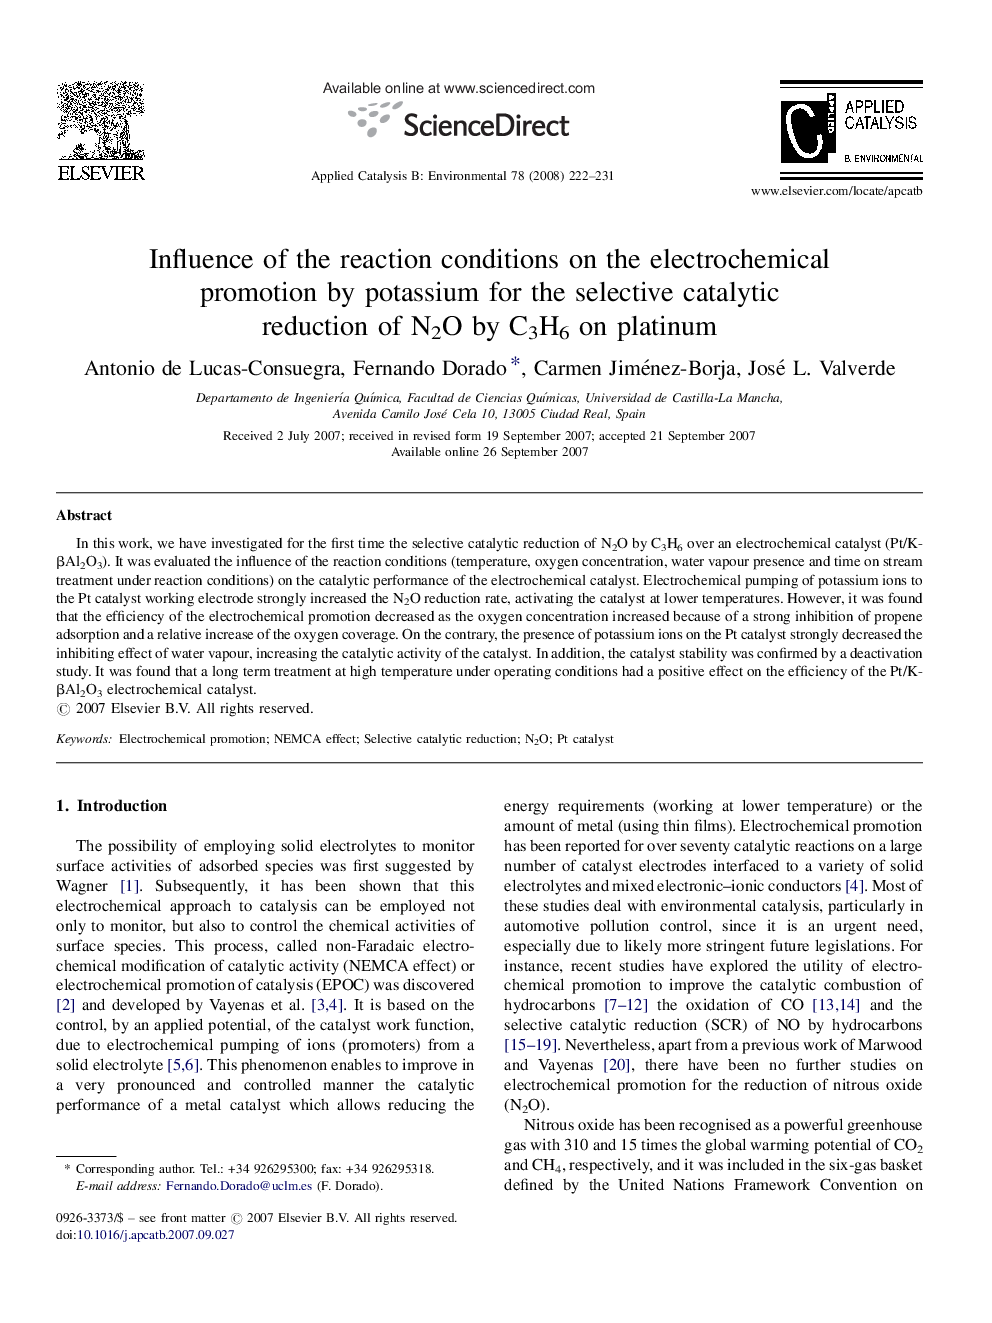 Influence of the reaction conditions on the electrochemical promotion by potassium for the selective catalytic reduction of N2O by C3H6 on platinum